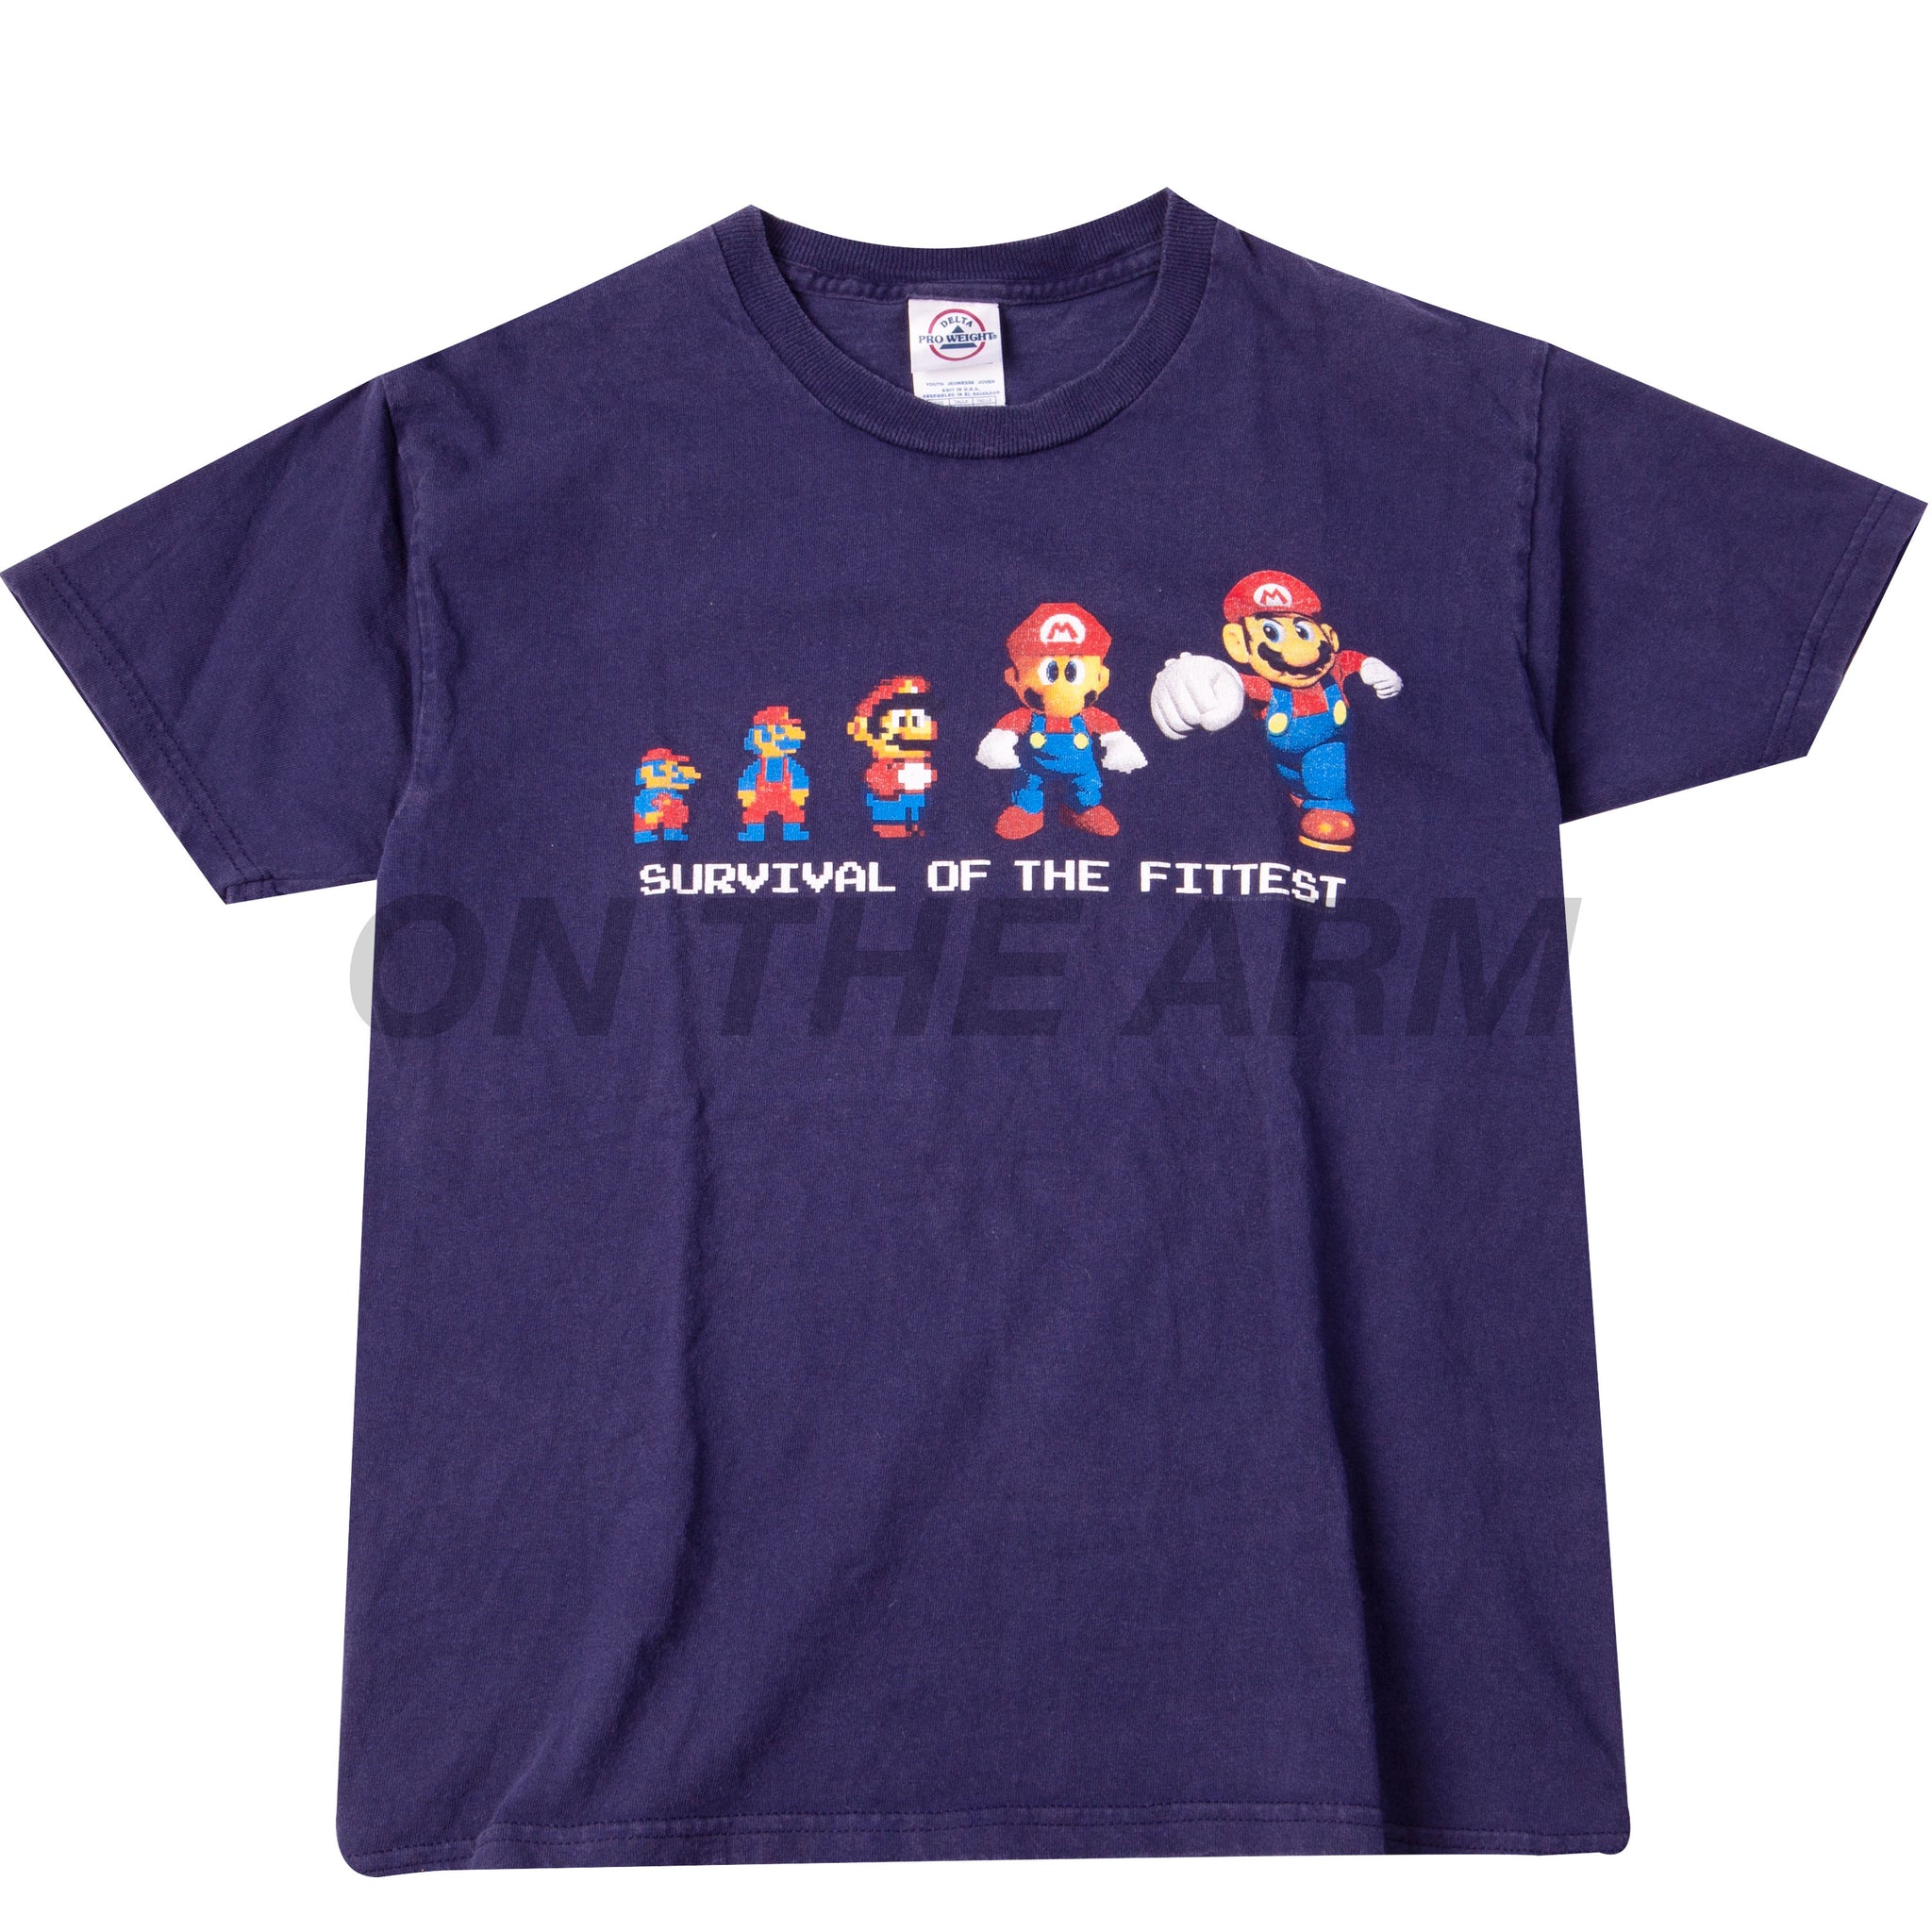 Vintage Navy Super Mario Survival Of The Fittest Tee